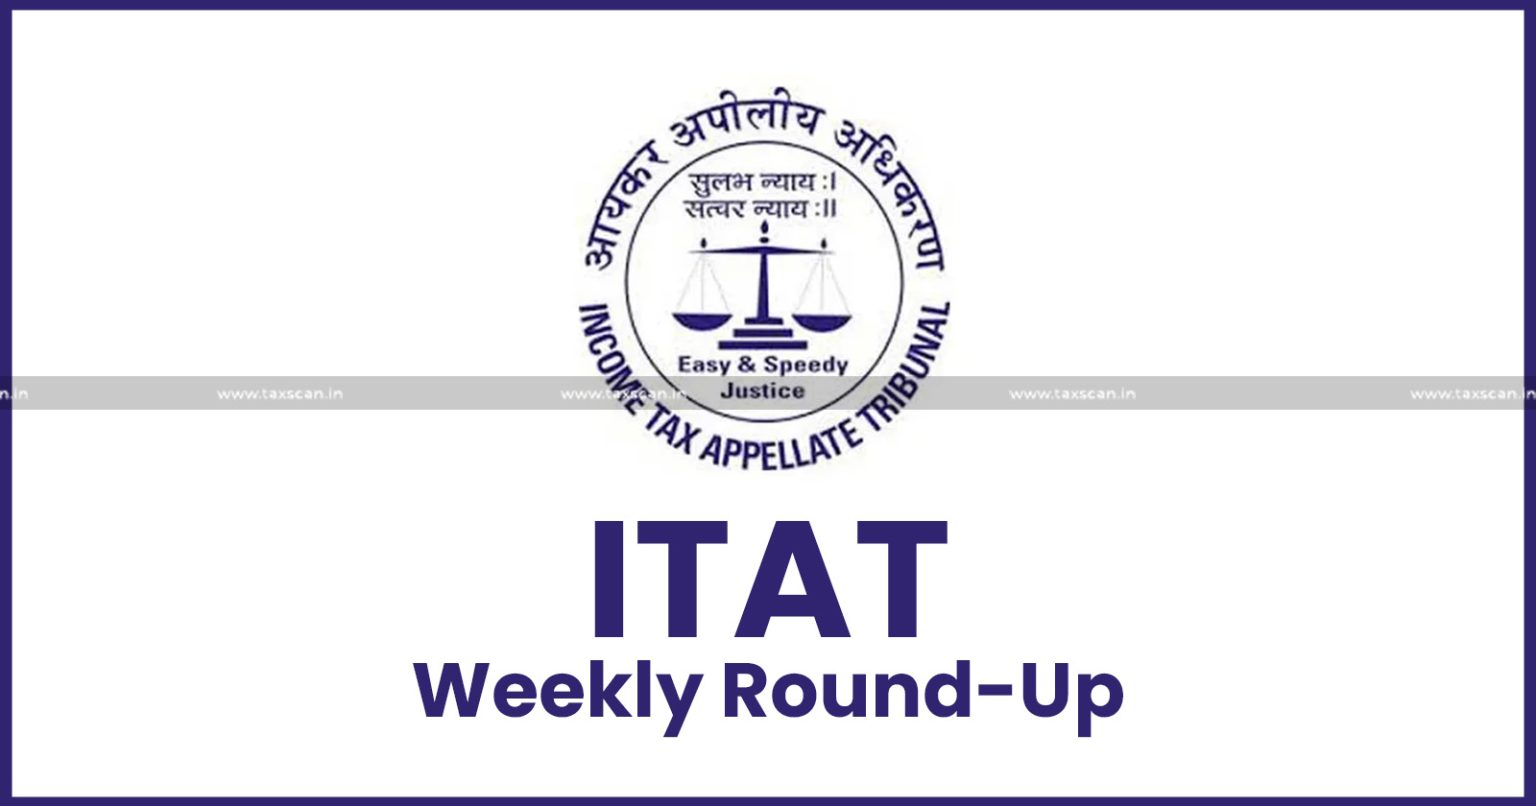 ITAT - Weekly - Round - Up - Weekly - Round-Up - ITAT - taxscan